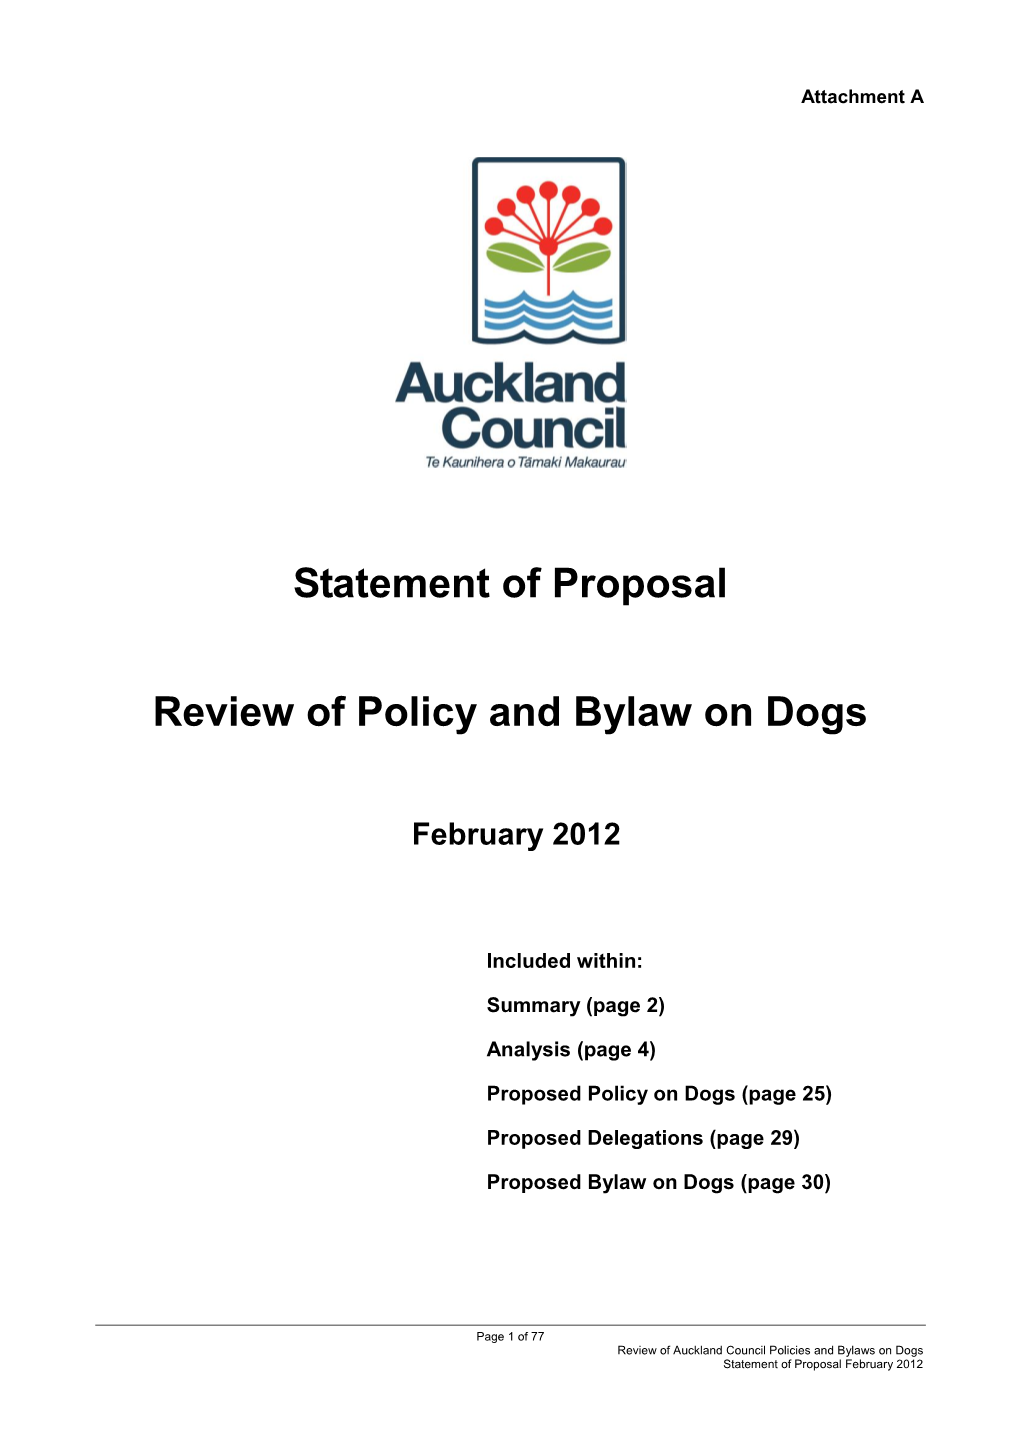 Statement of Proposal Review of Policy and Bylaw on Dogs